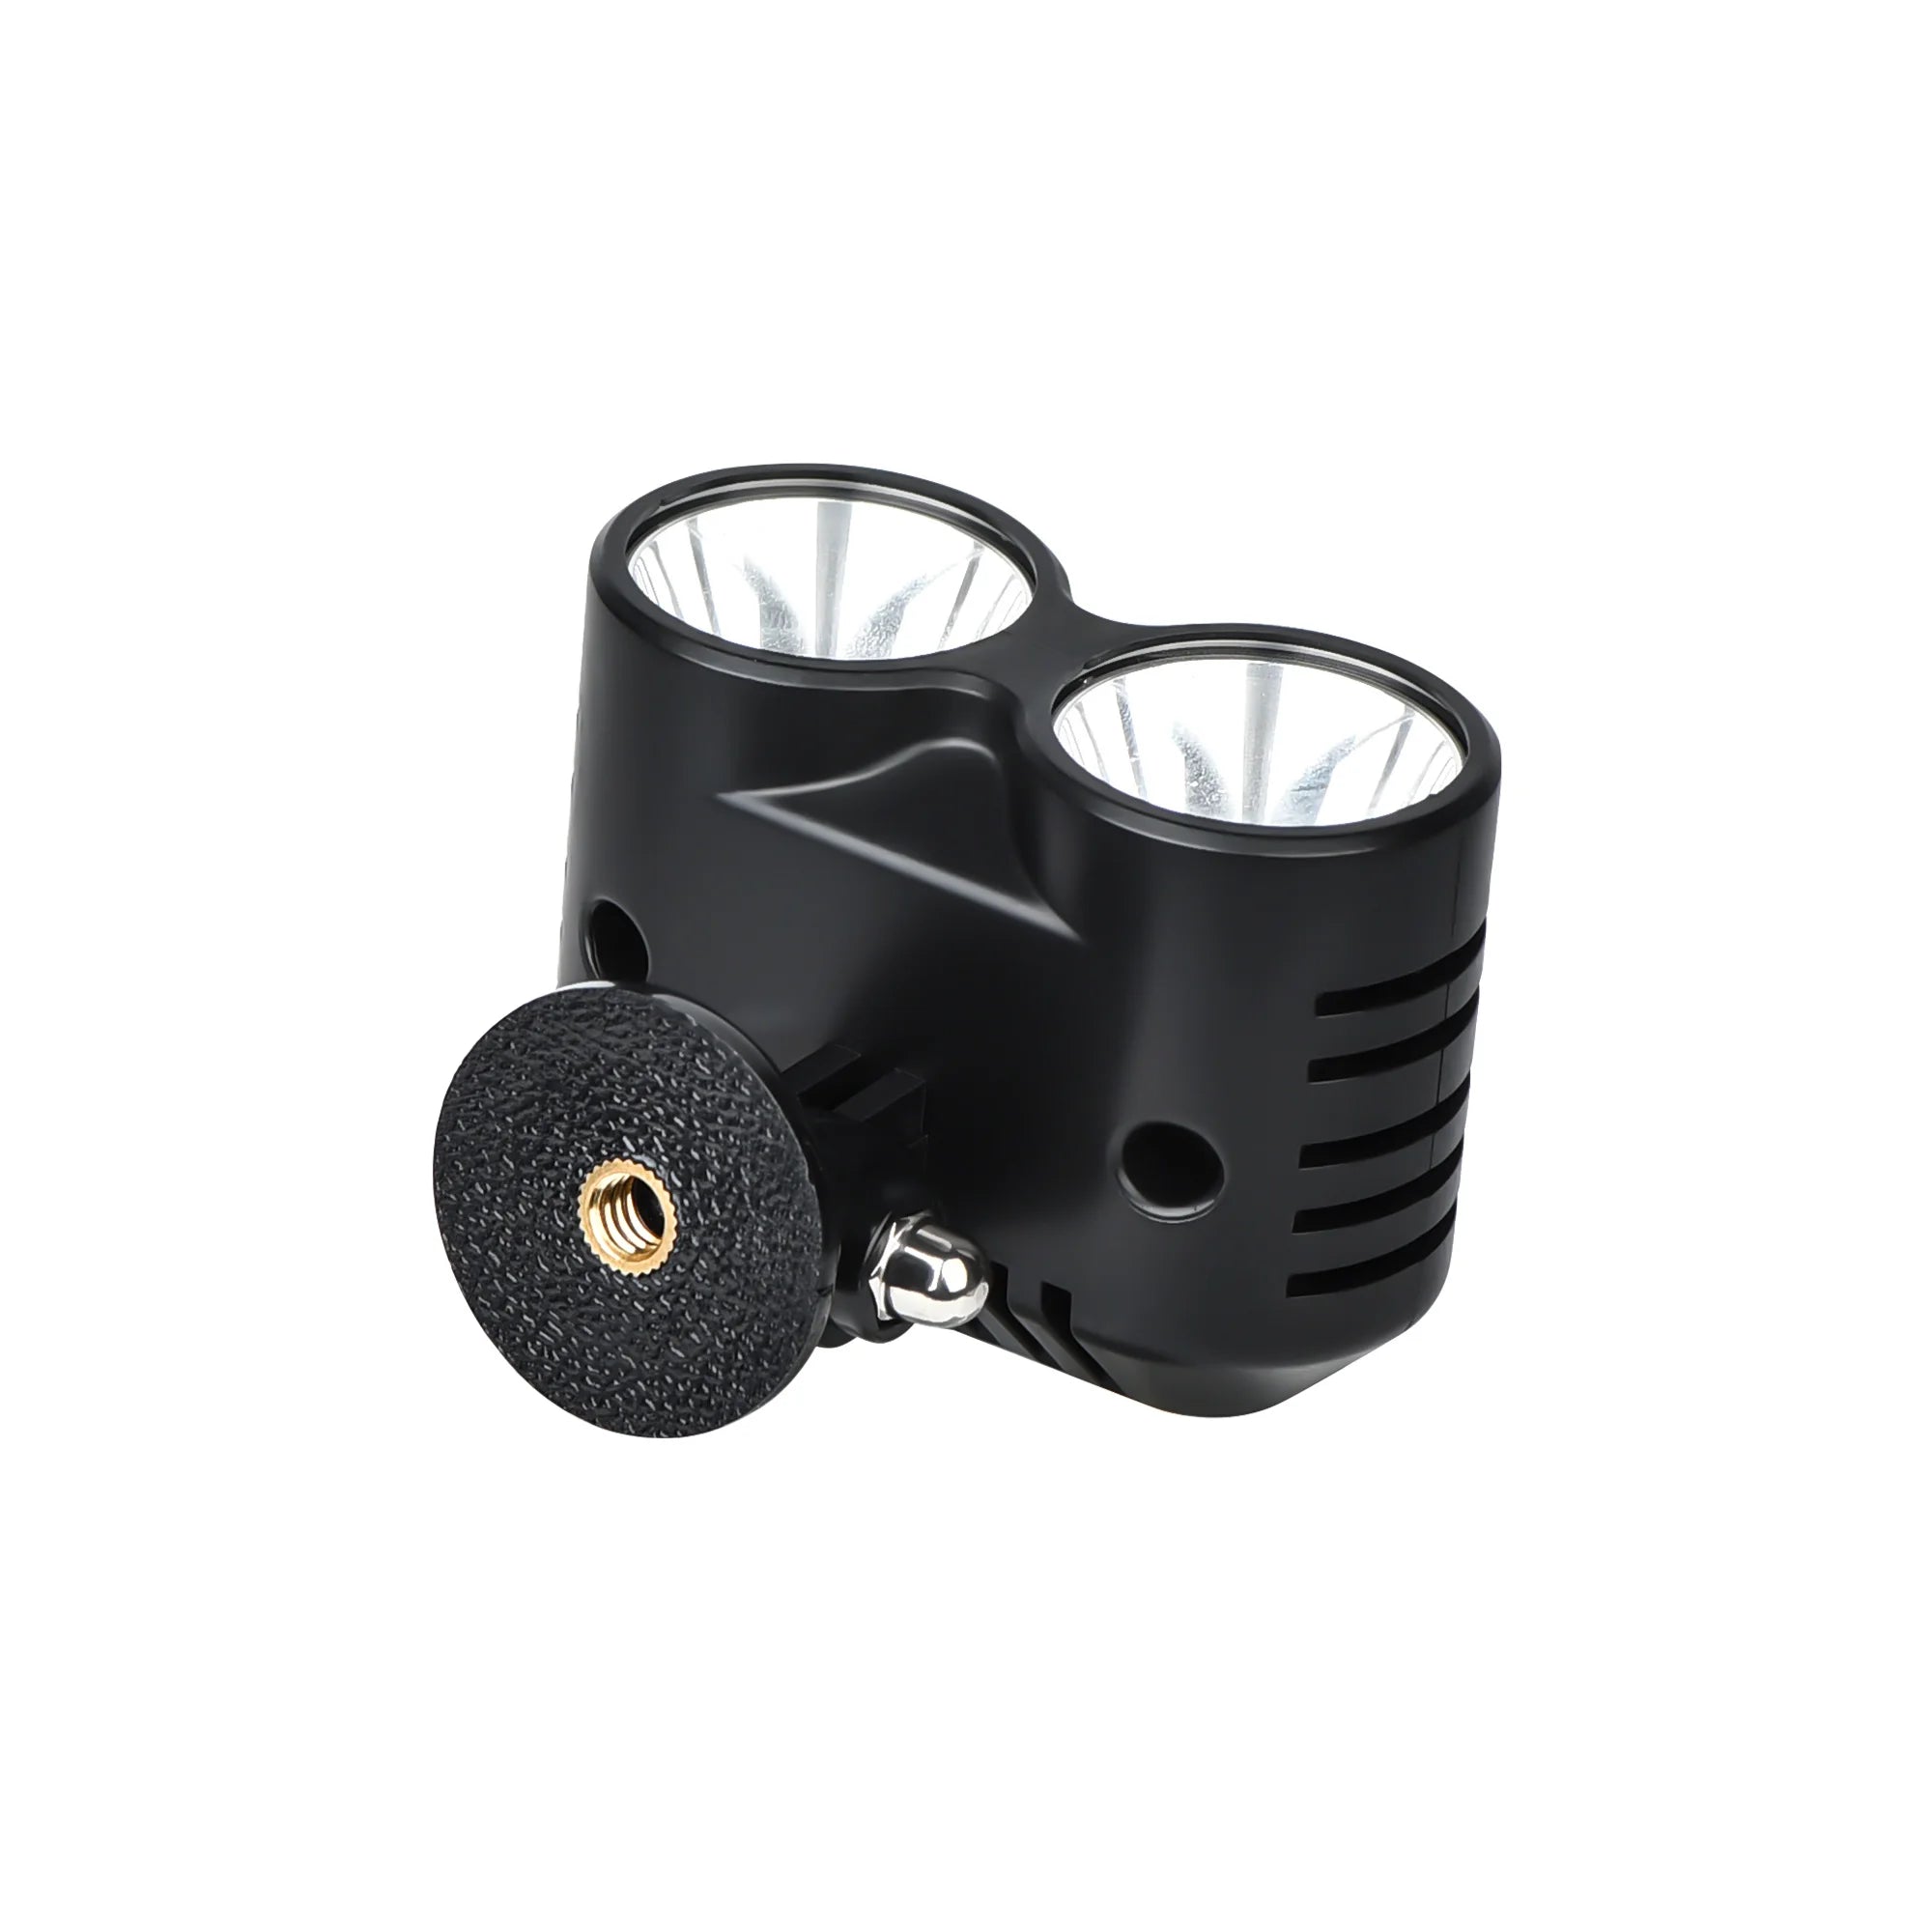 Search Light For DJI Avata, bottom heat sink design, stable heat dissipation, long time flight without worry 